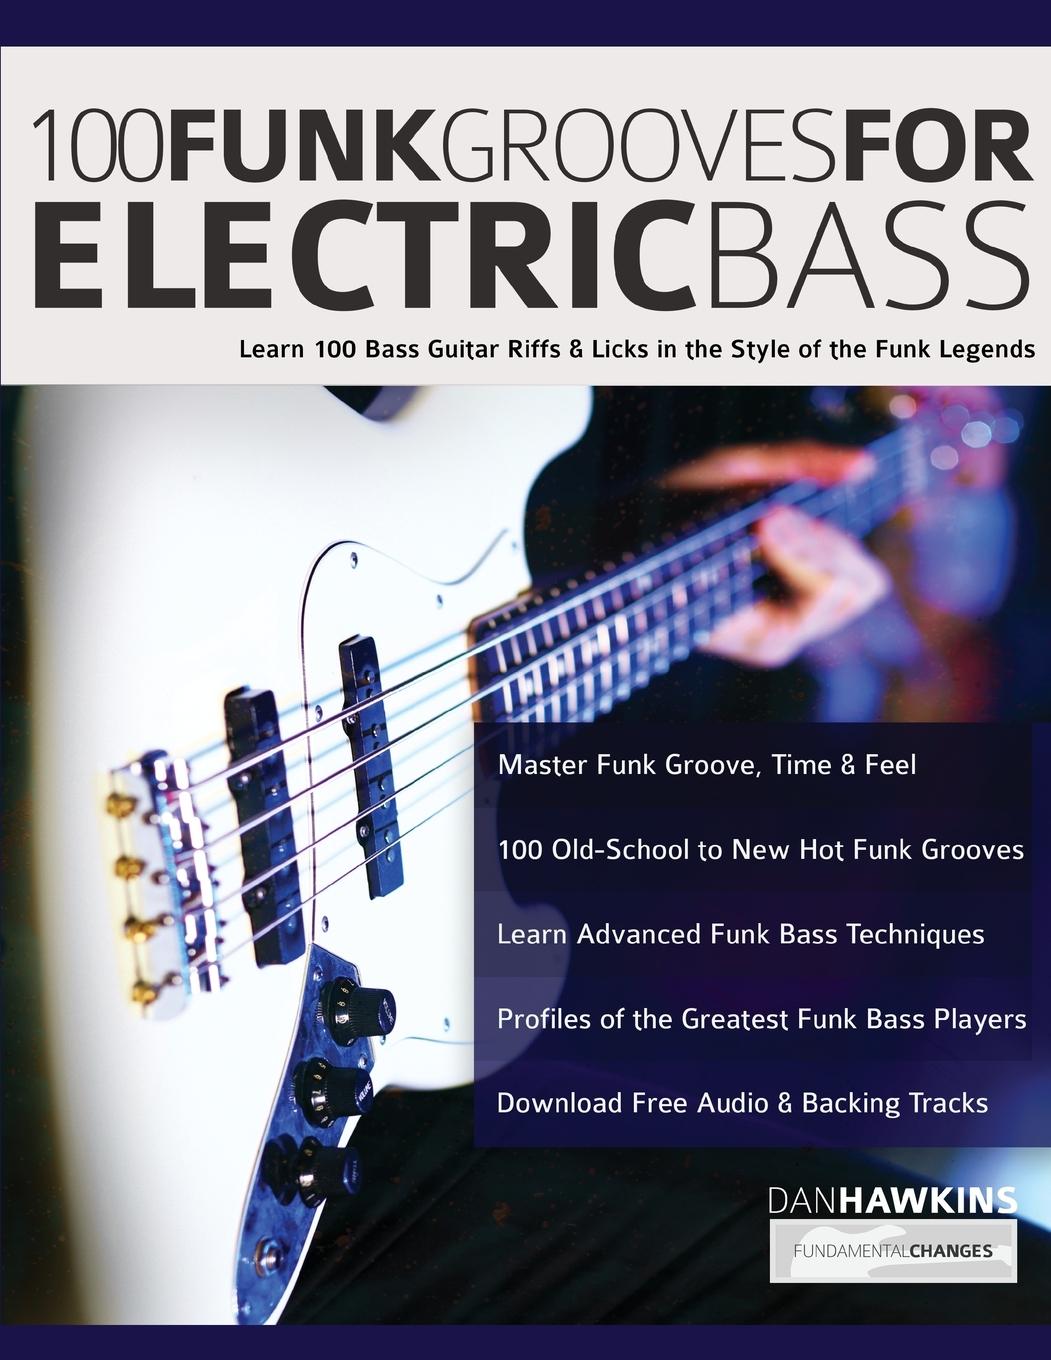 Book 100 Funk Grooves for Electric Bass Joseph Alexander